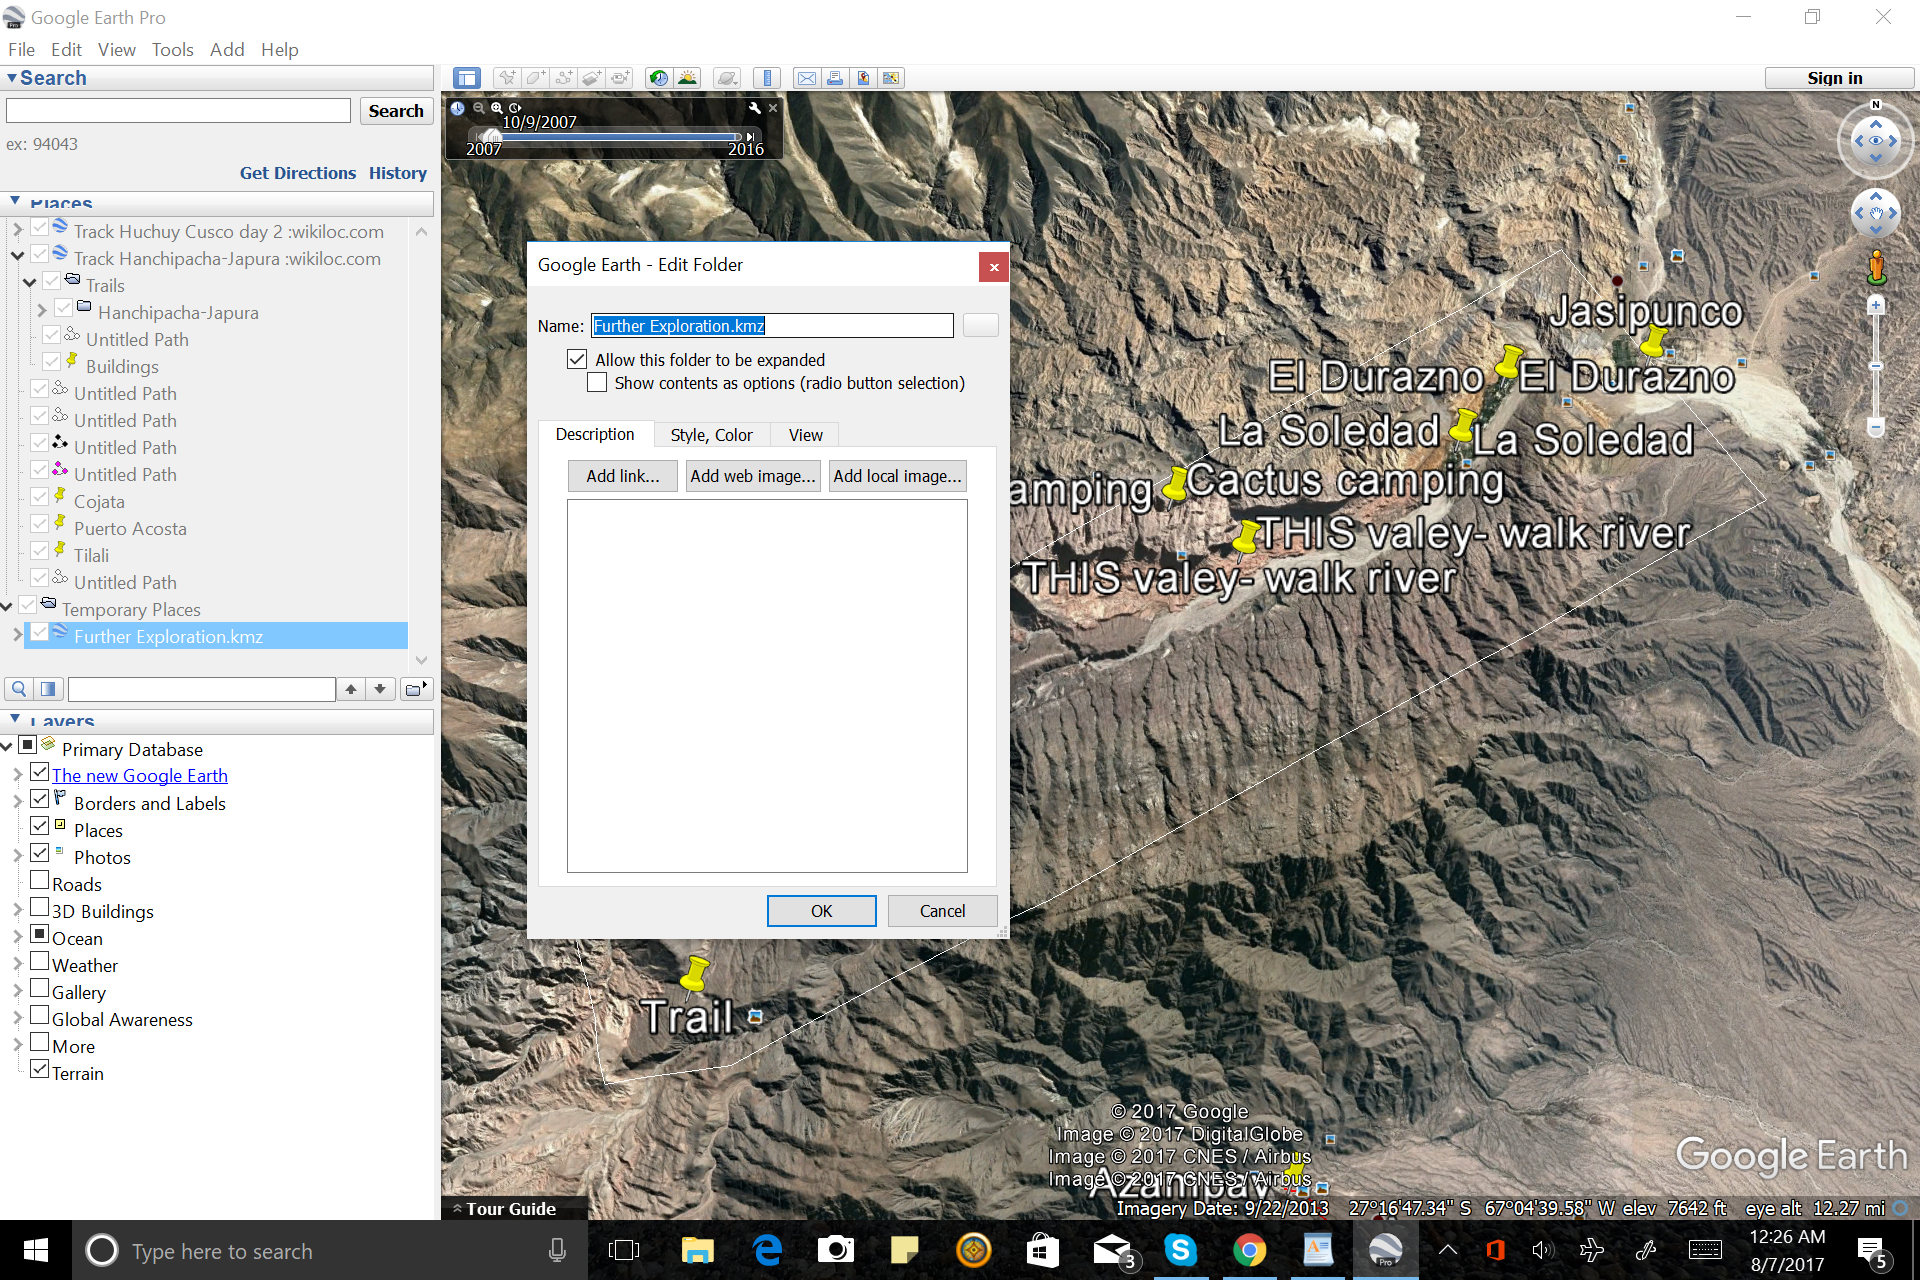 how to create a kmz file in google earth pro